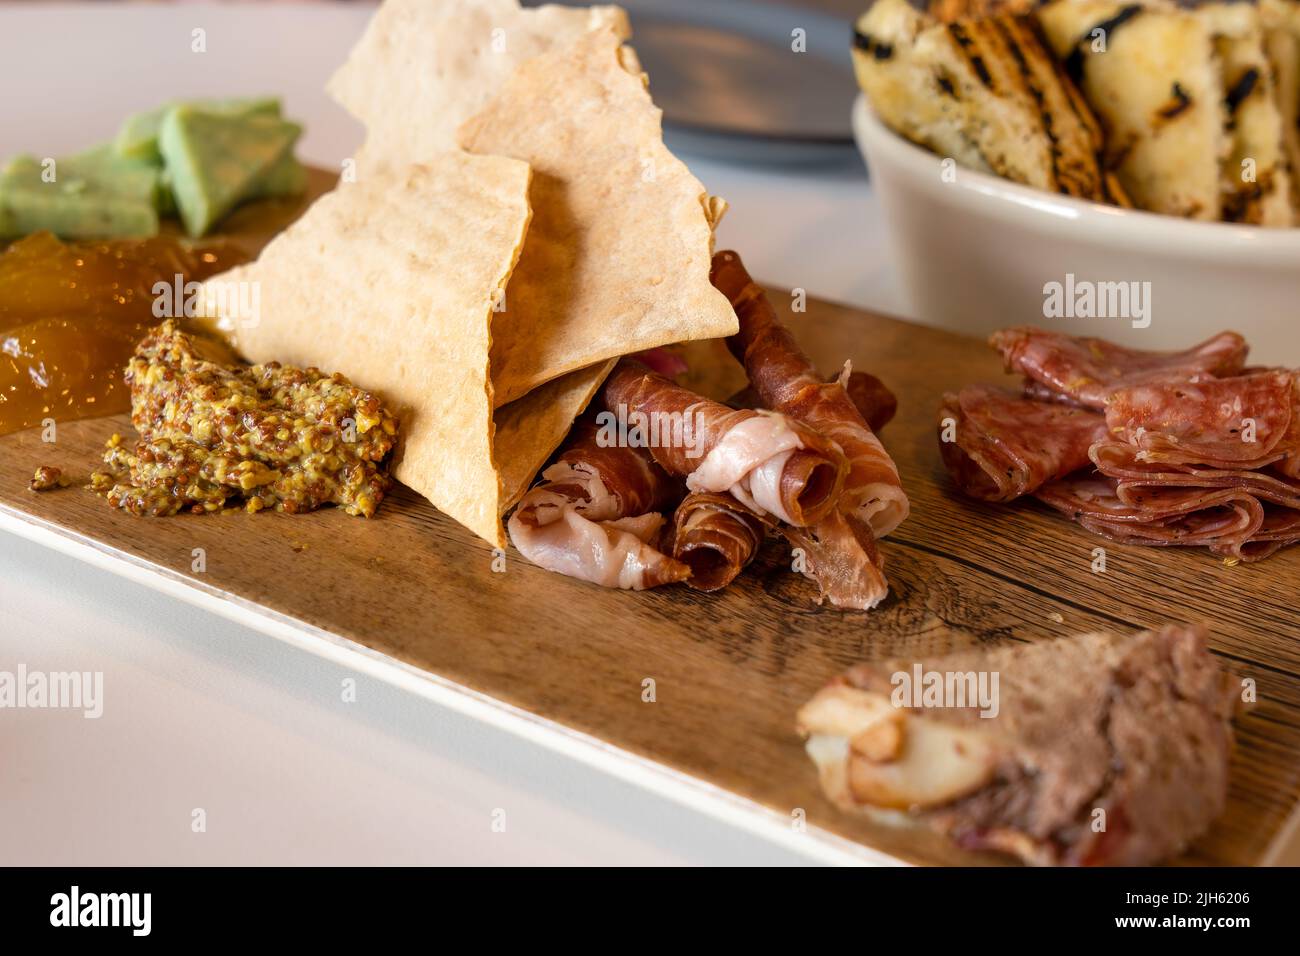 Charcuterie Board with selective focus contains meats, cheese, chutney, and mustard Stock Photo